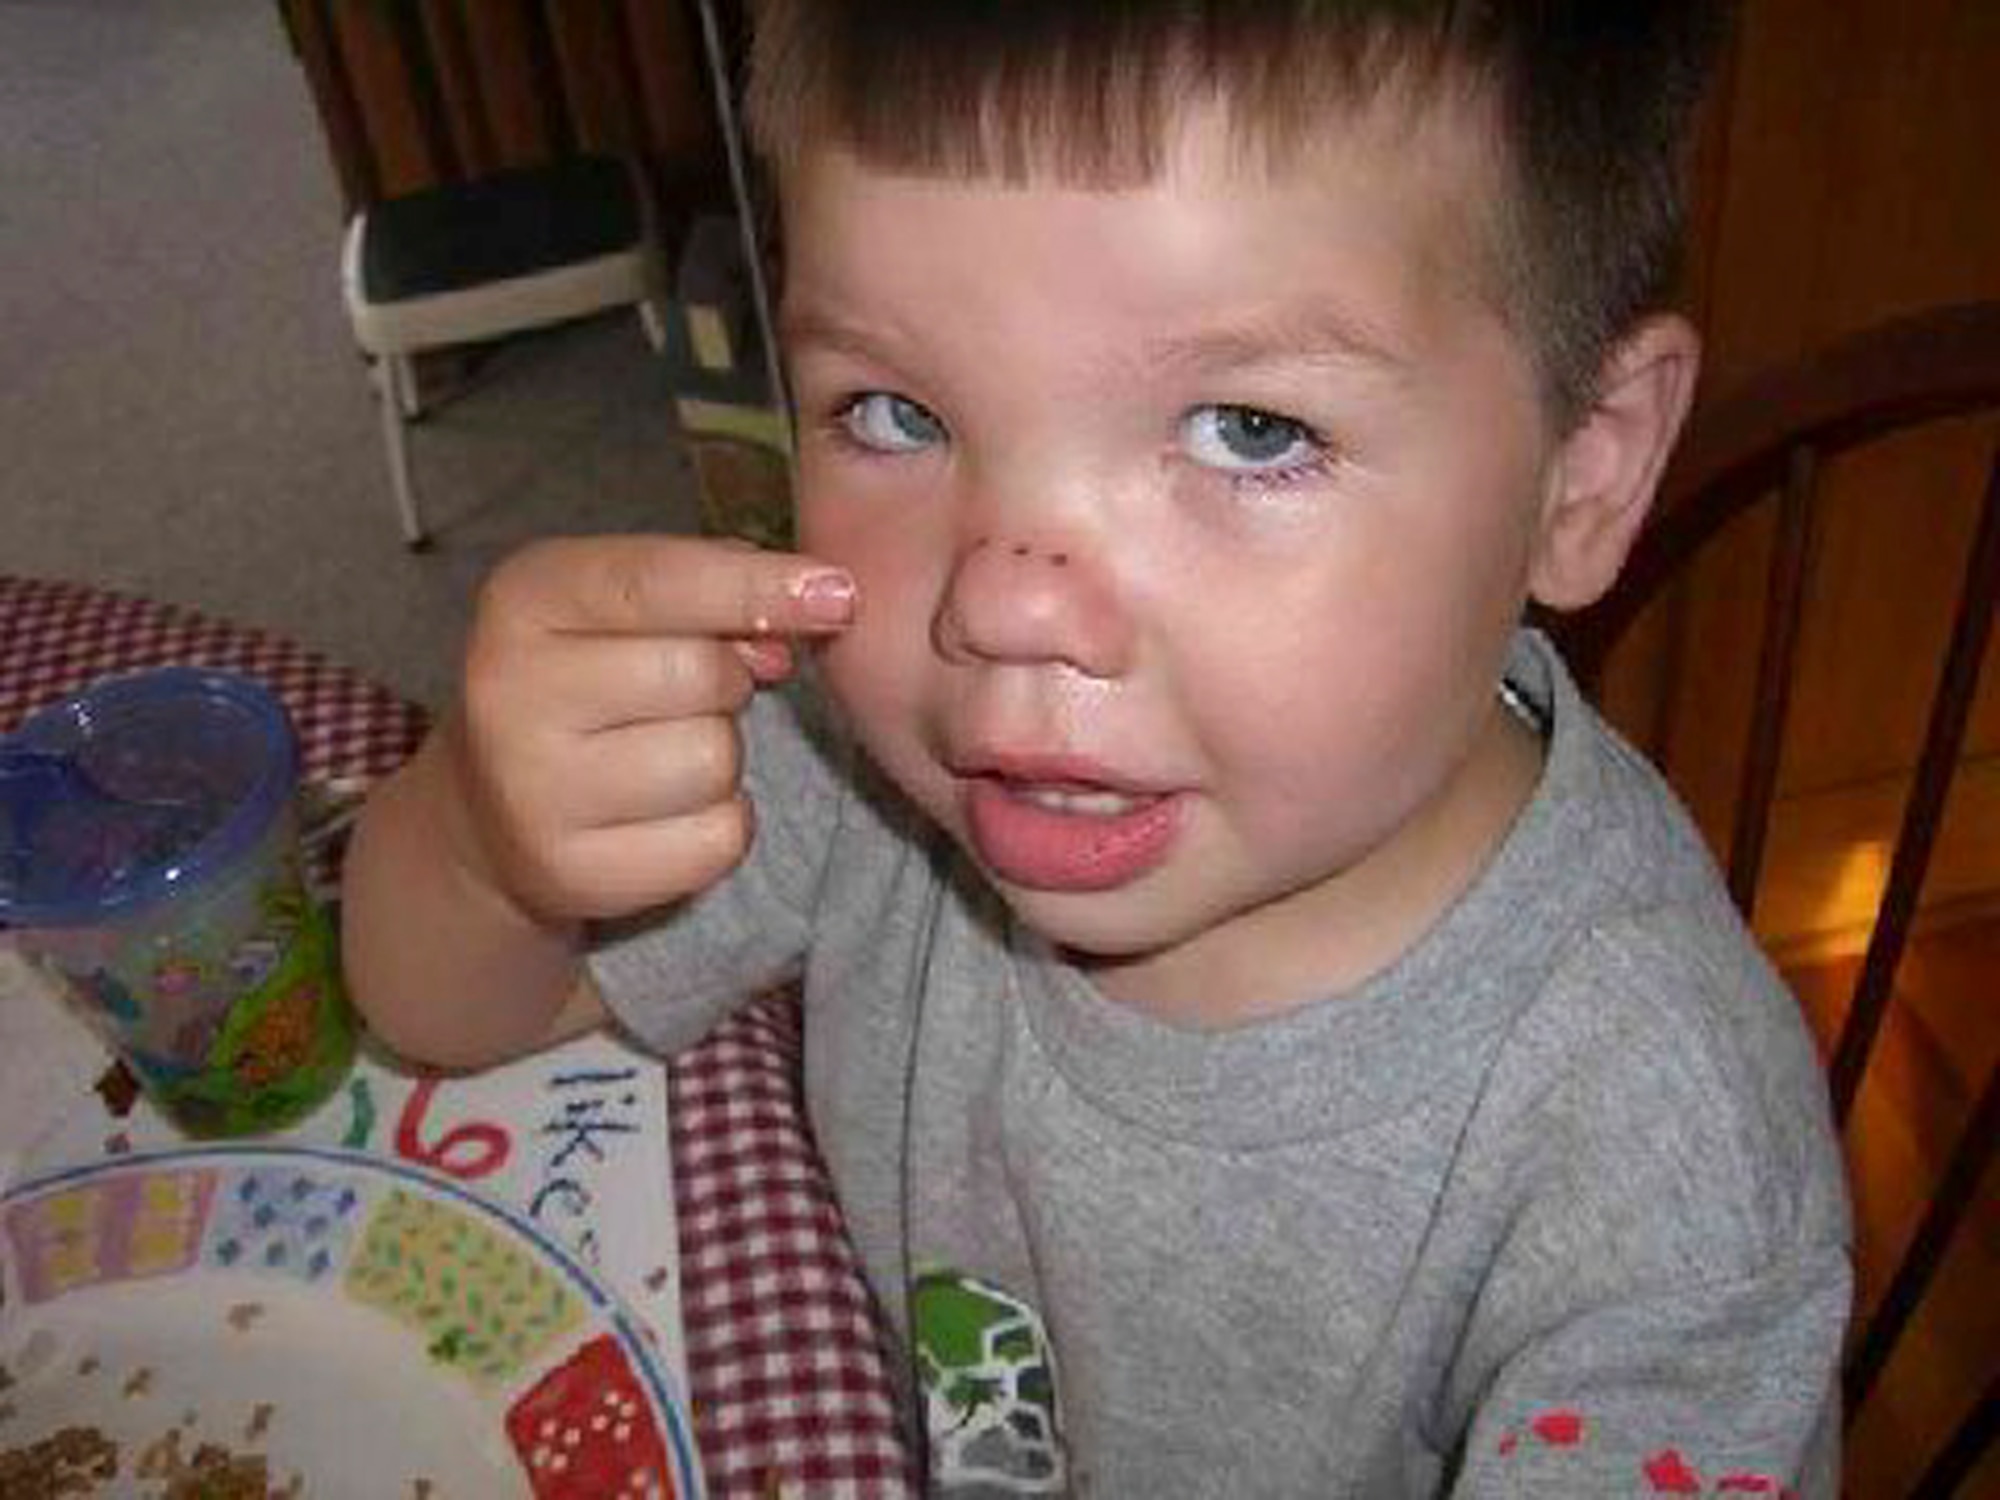 THAT'S GOTTA HURT! - Photos showing boy with fork through nose no hoax: In the emergency room, doctors had to 
remove the fork after three of the tines had pierced the boy?s nose during a fall. Two days later at home, the puncture wounds had already begun to heal. (Courtesy Photo)